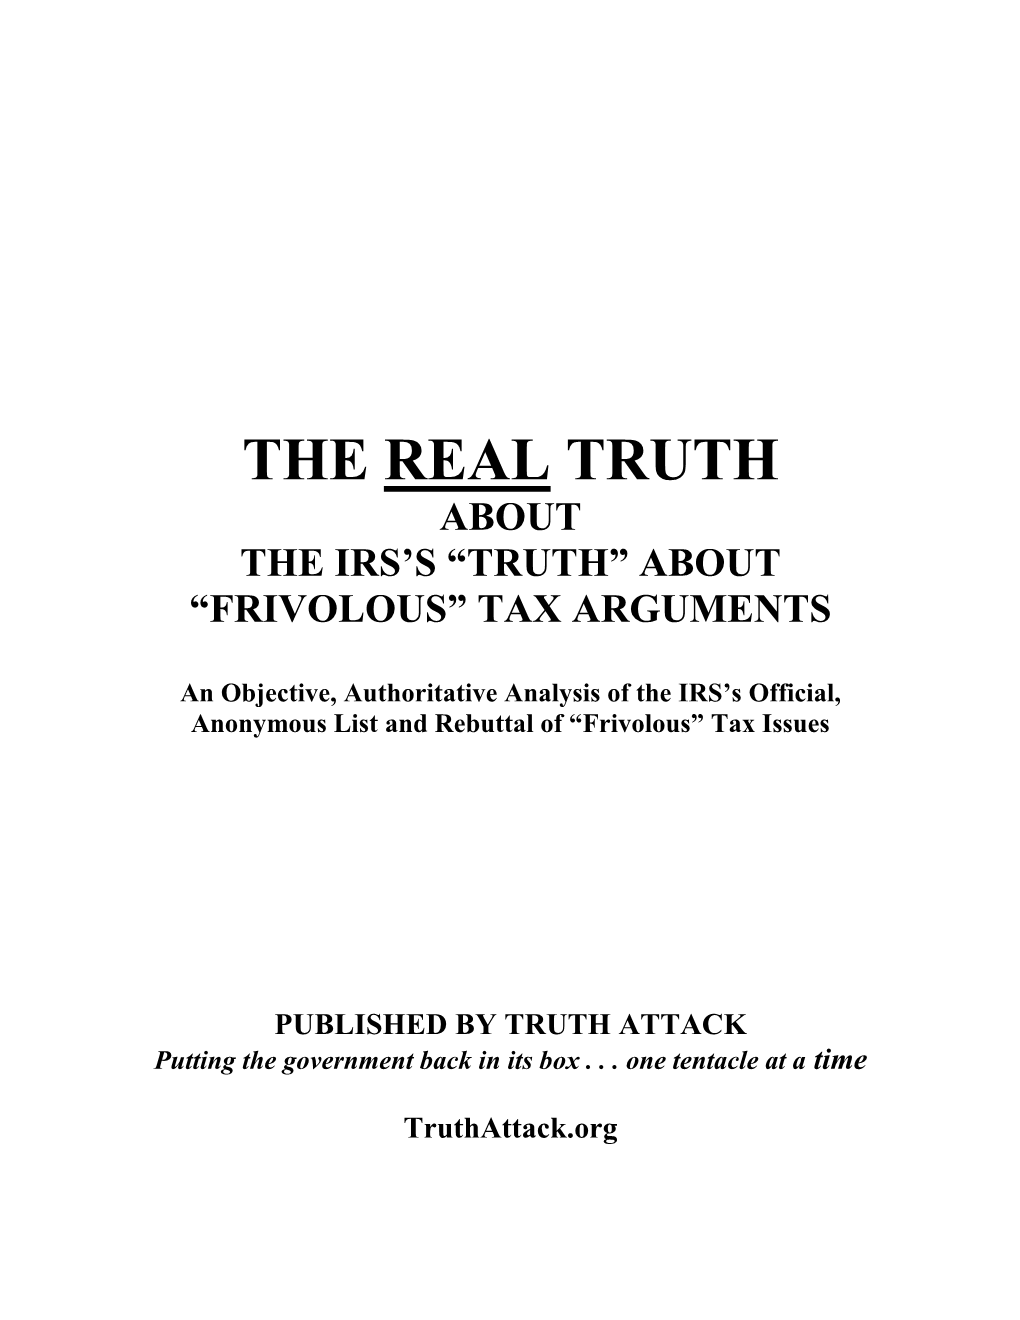 The Real Truth About Frivolous Arguments